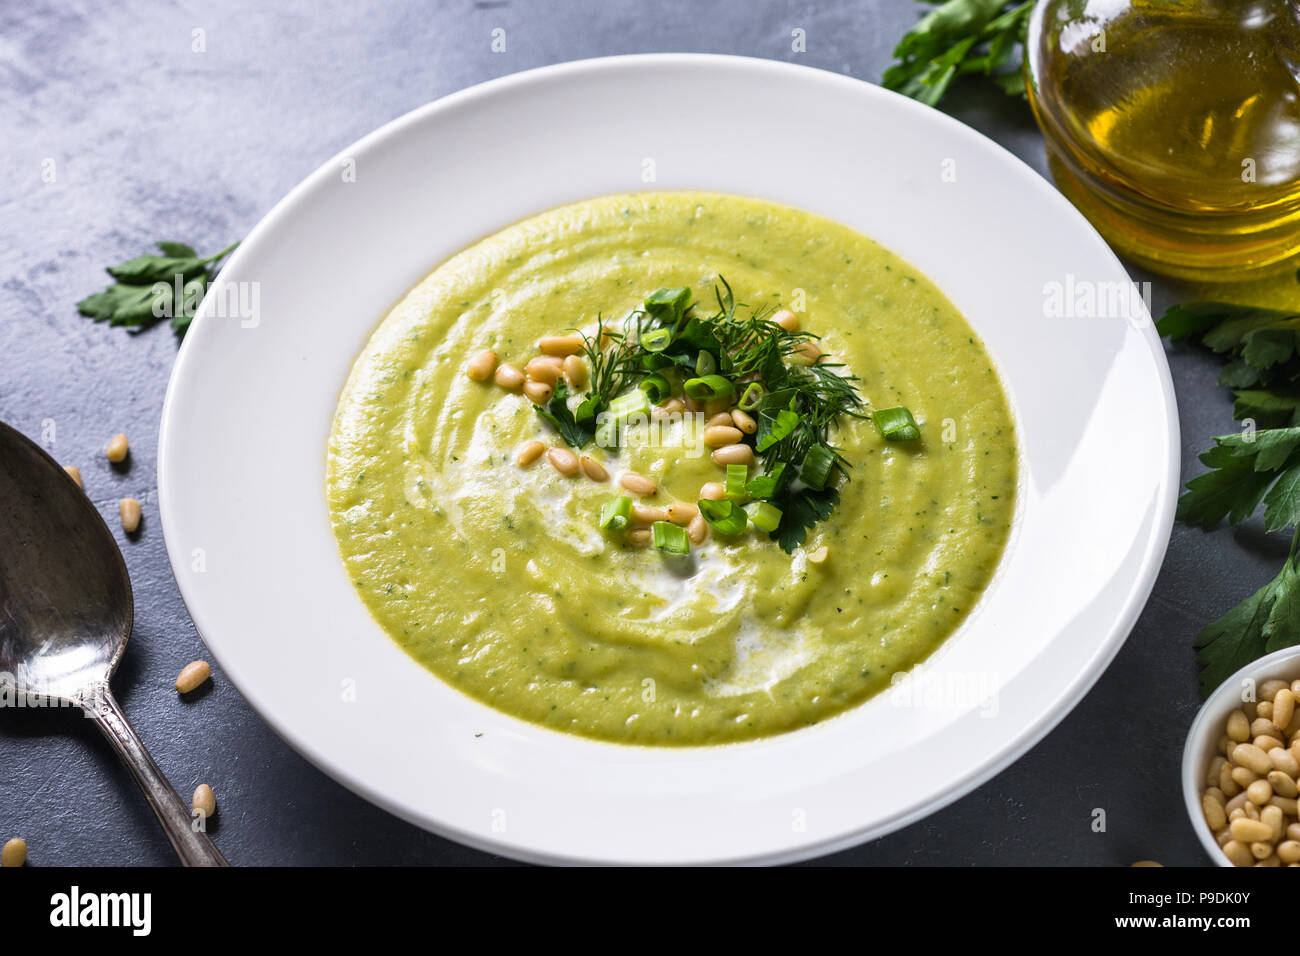 Cream soup with zucchini, herbs and cream.  Diet food, meatless dish. Stock Photo